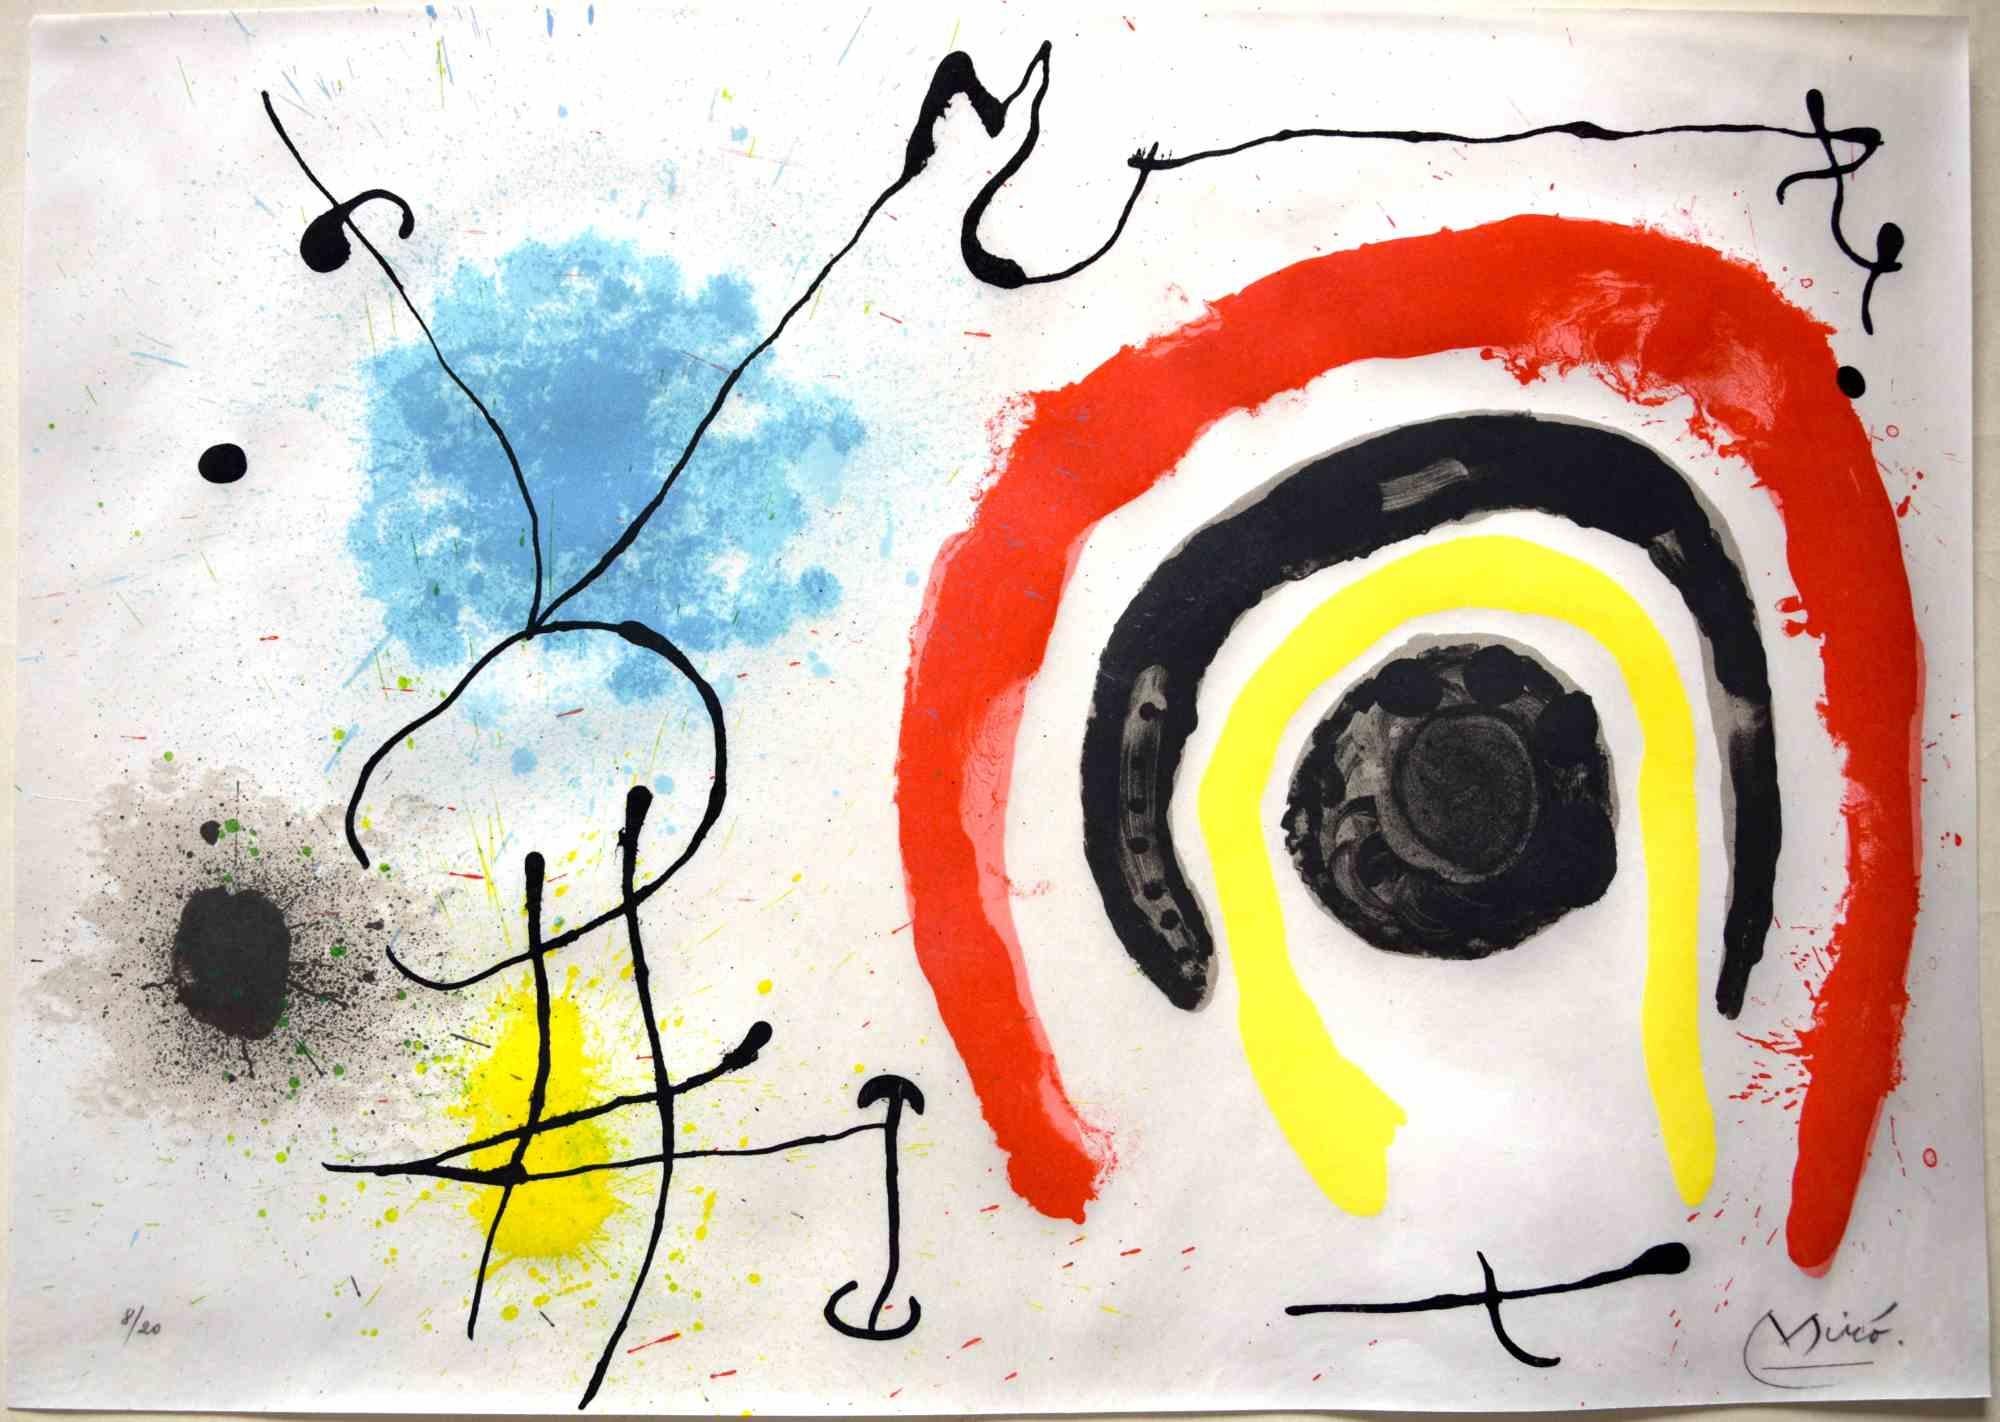 Le Lézard aux Plumes d'Or is a beautiful and rare color lithograph on parchment, realized in 1967 by the Spanish Surrealist artist Joan Miró  (Montroing, 1893 - Mallorca, 1983).

Numbered on the lower left: 8/20.

Hand- signed on the lower